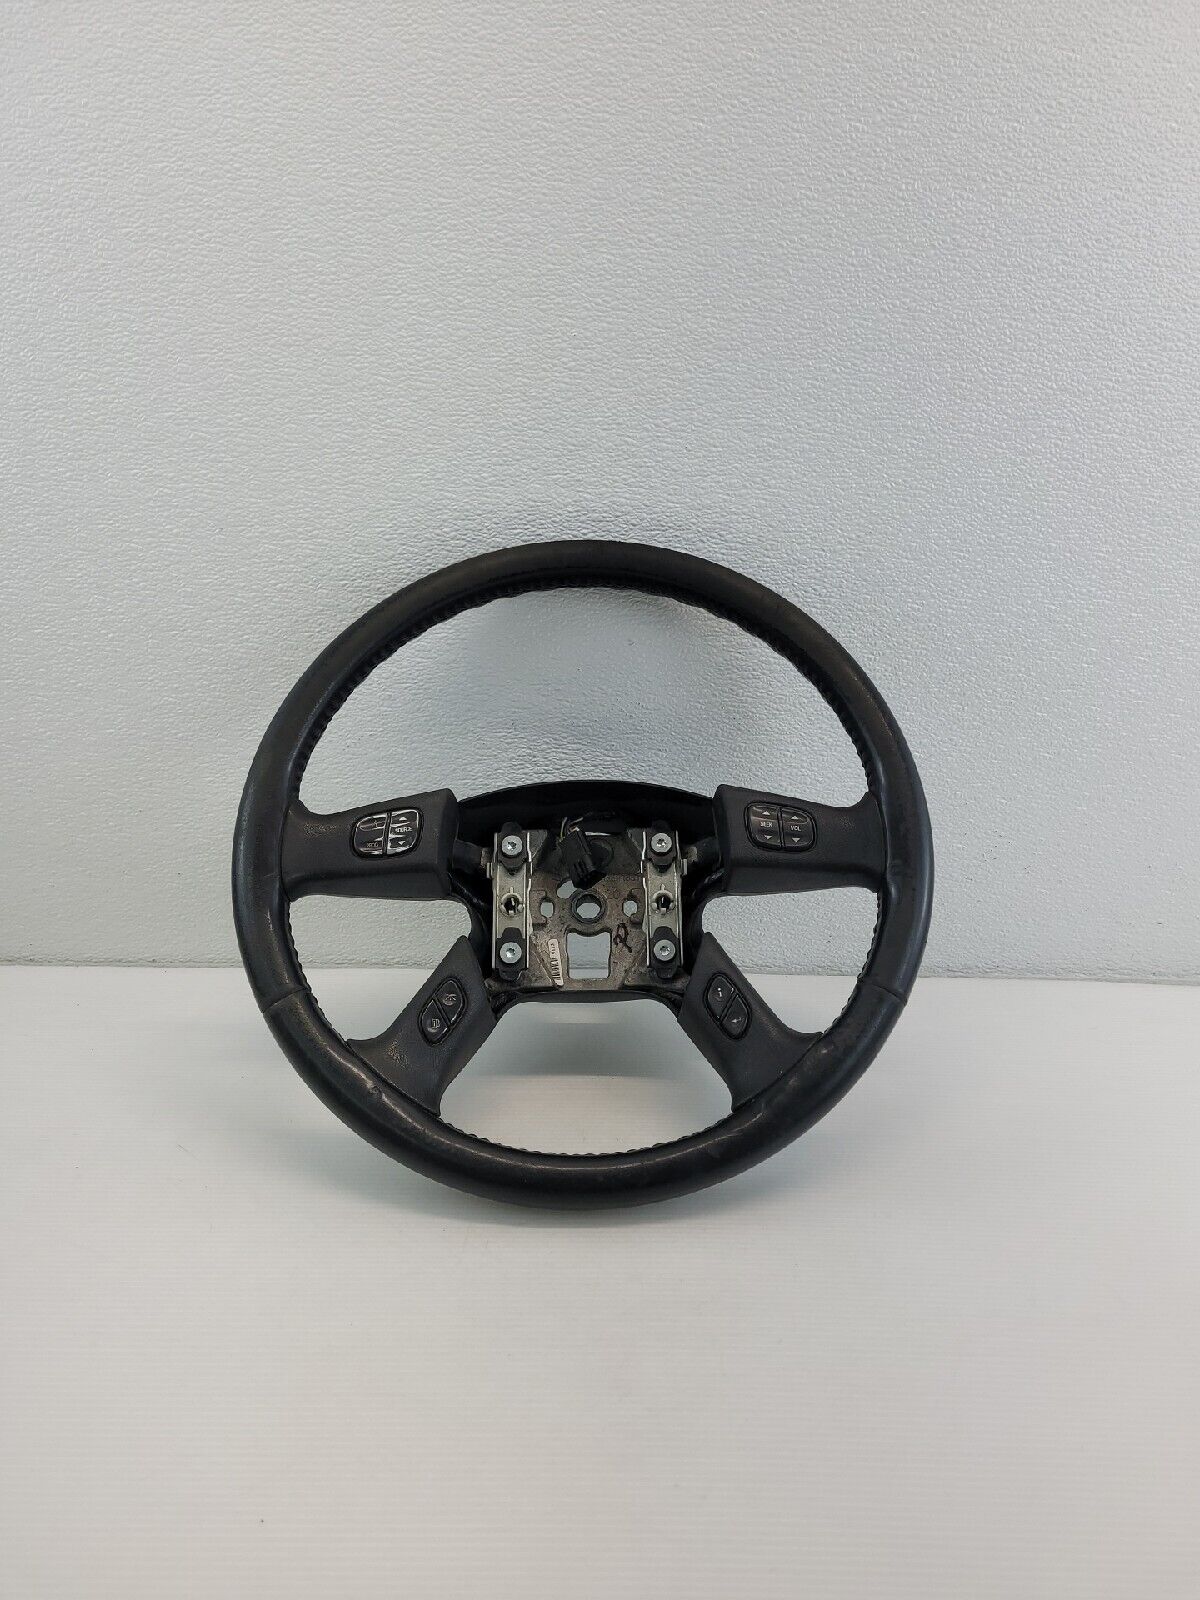 2006 GMC ENVOY XL STEERING WHEEL BLACK WITH BUTTONS P10364488 OEM 06     